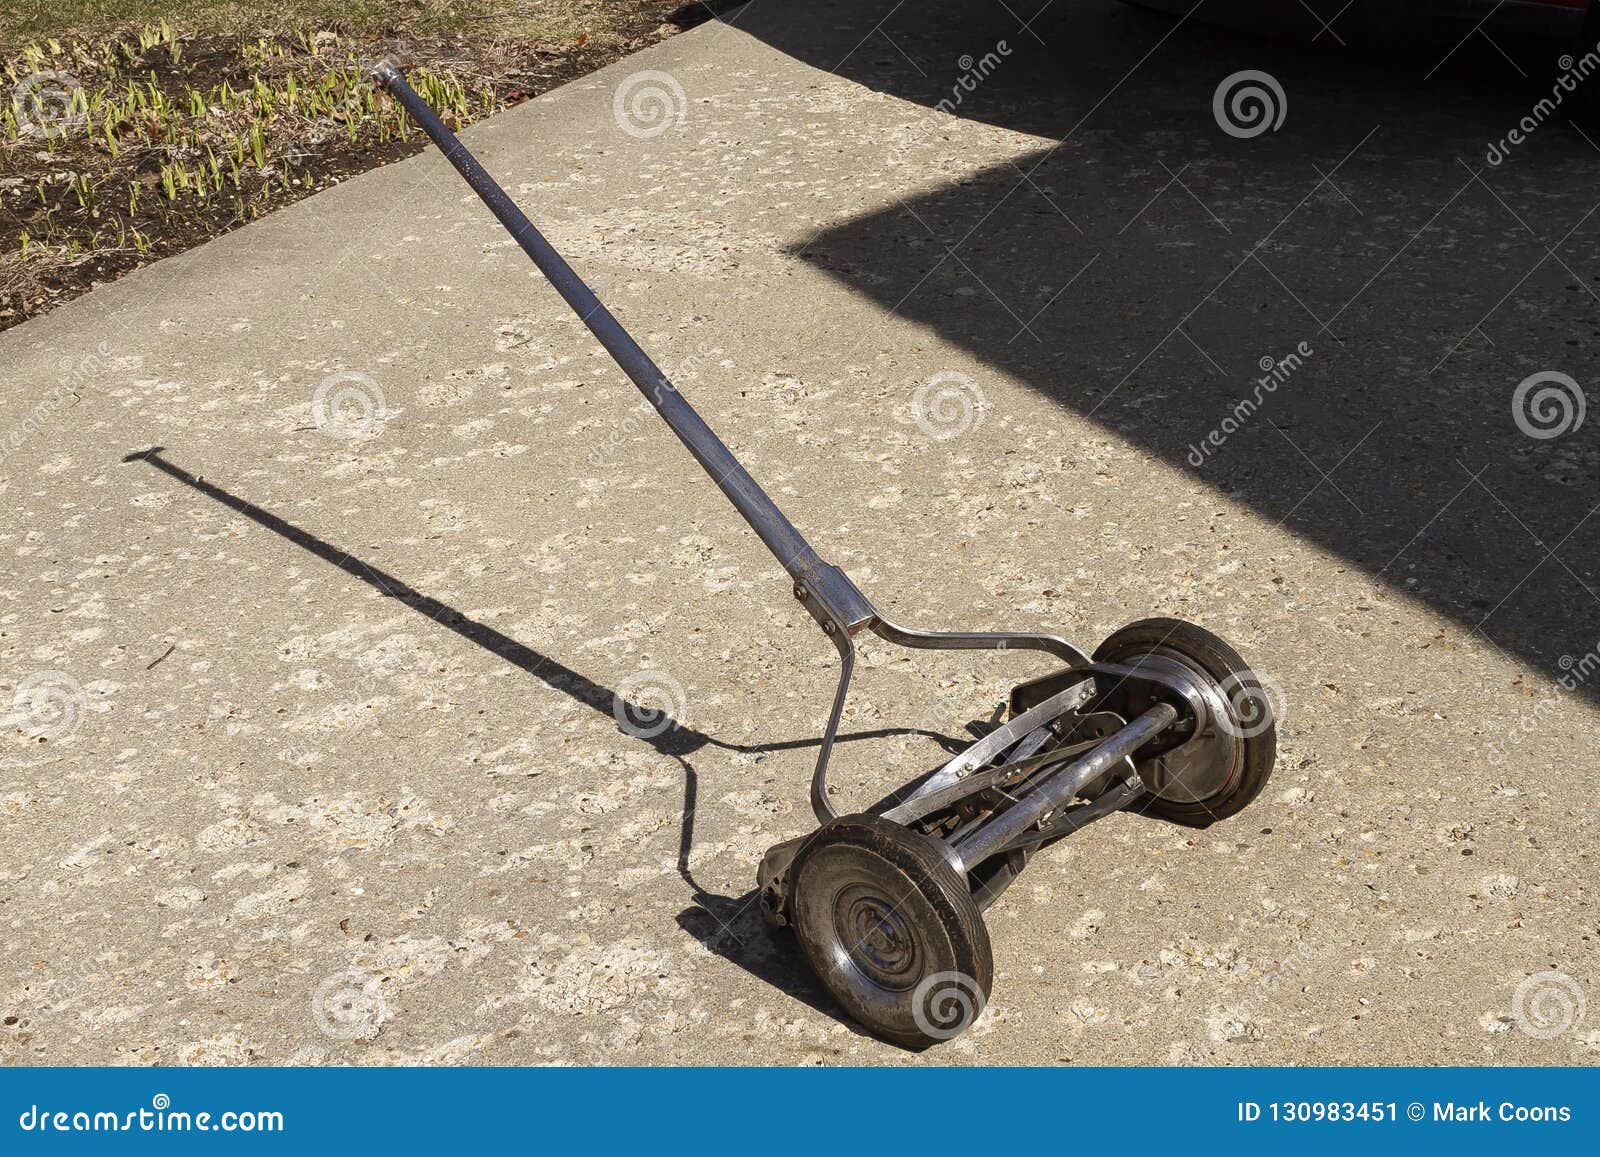 126 Reel Lawnmower Stock Photos - Free & Royalty-Free Stock Photos from  Dreamstime